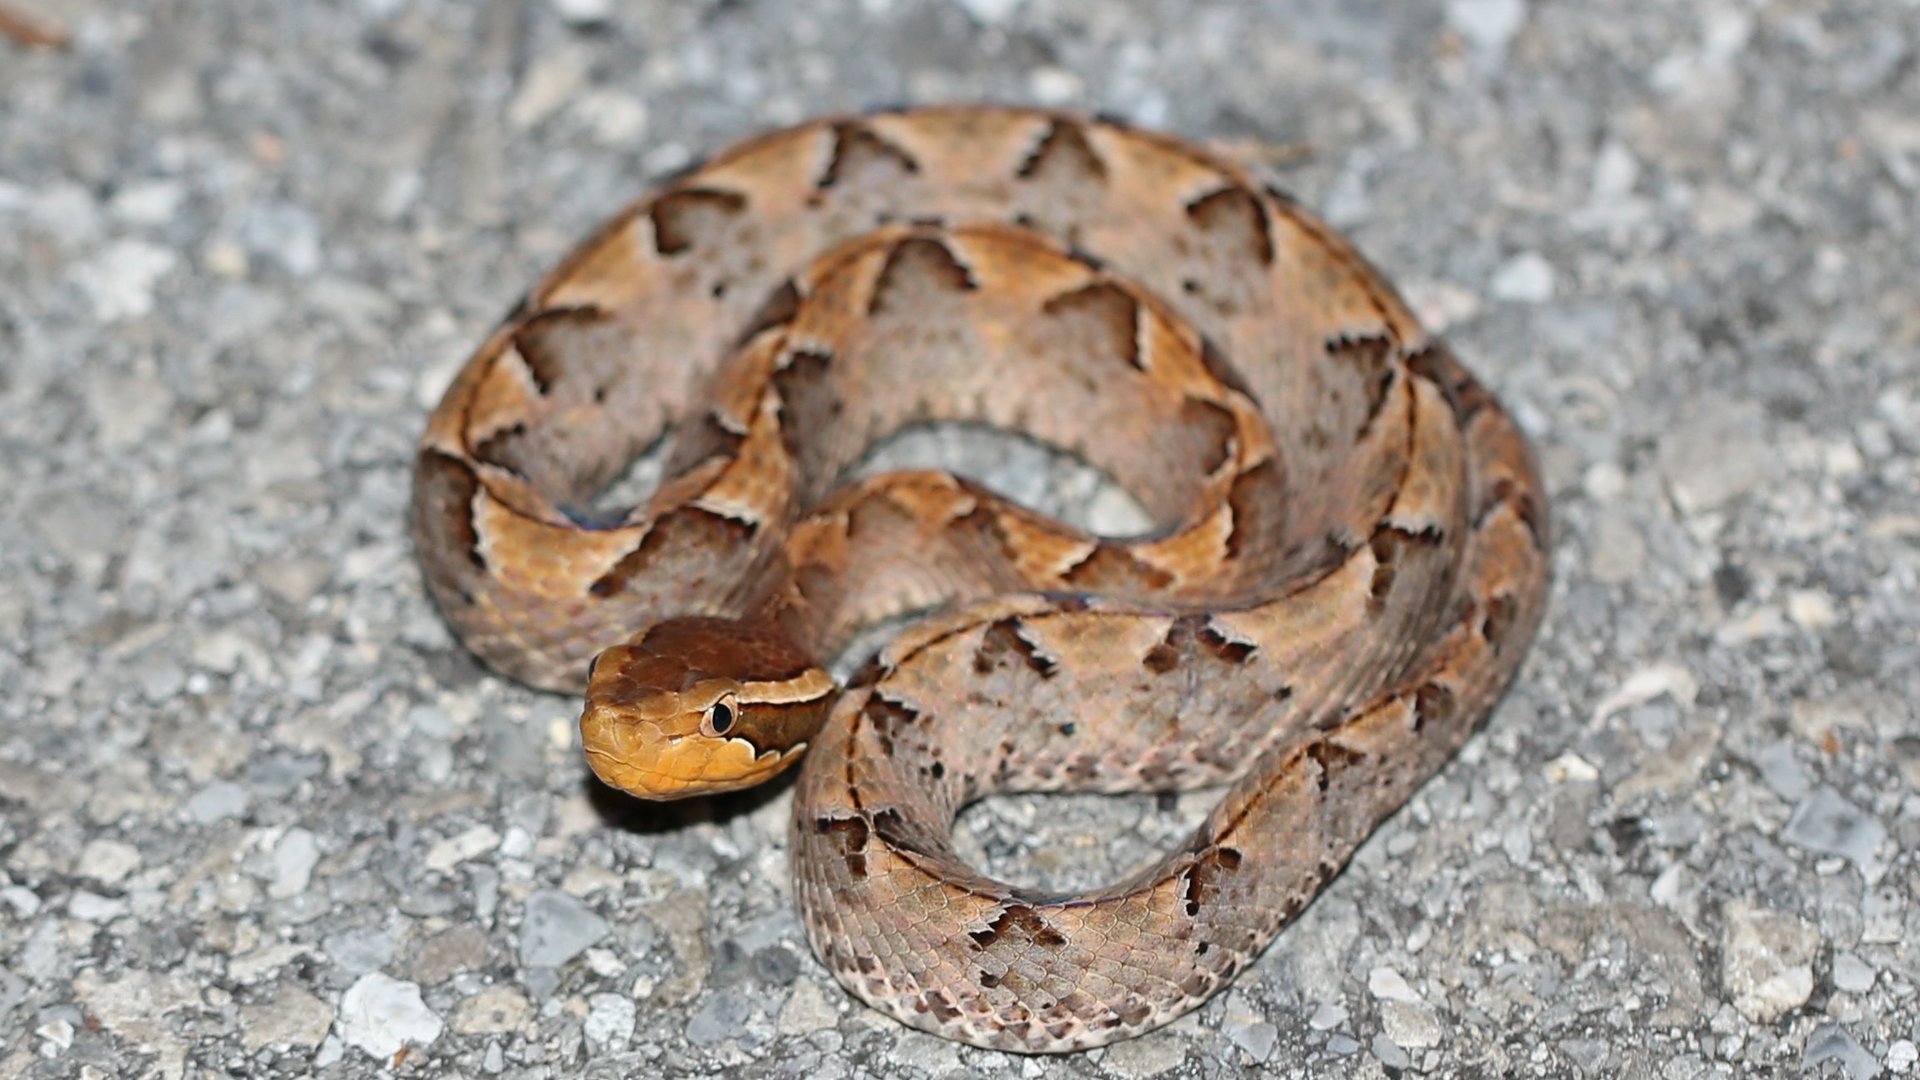 The picture shows a light brown snake with dark brown triangular markings on the back curled up and with its head up towards the camera, a very typical position of Malayan pit viper.